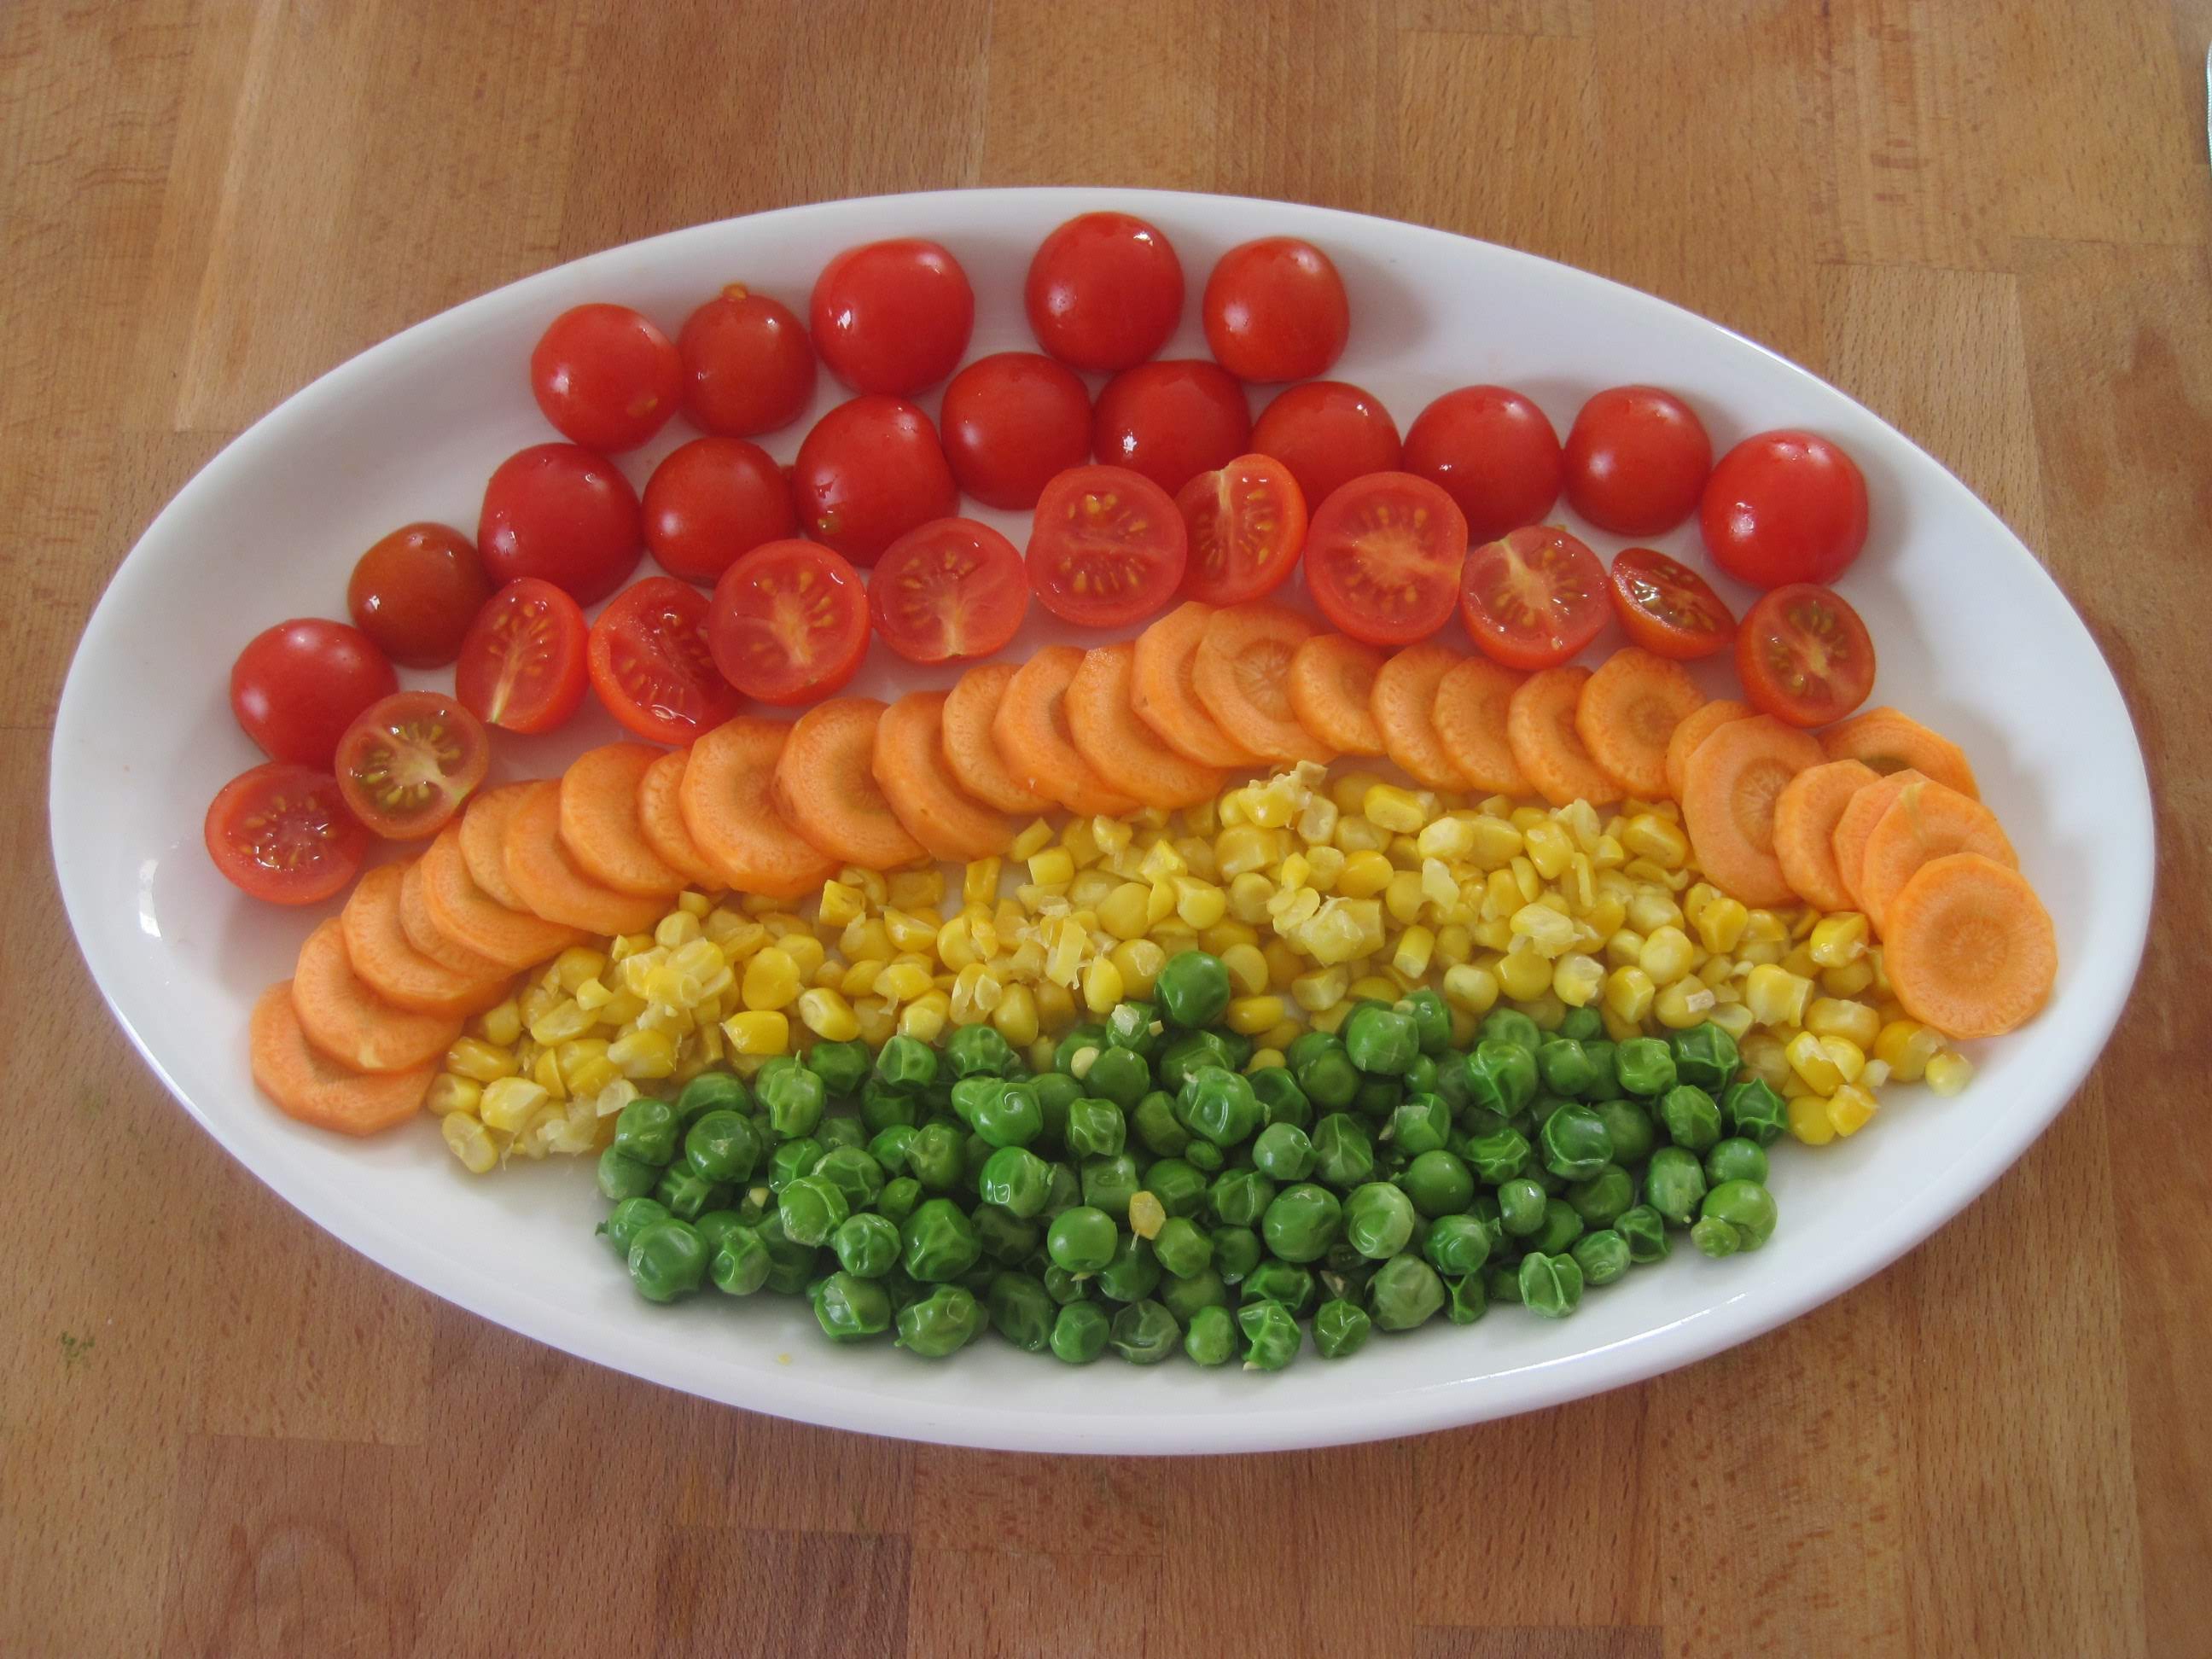 A rainbow veggie platter - this is how you get the little kids to love veggies;)